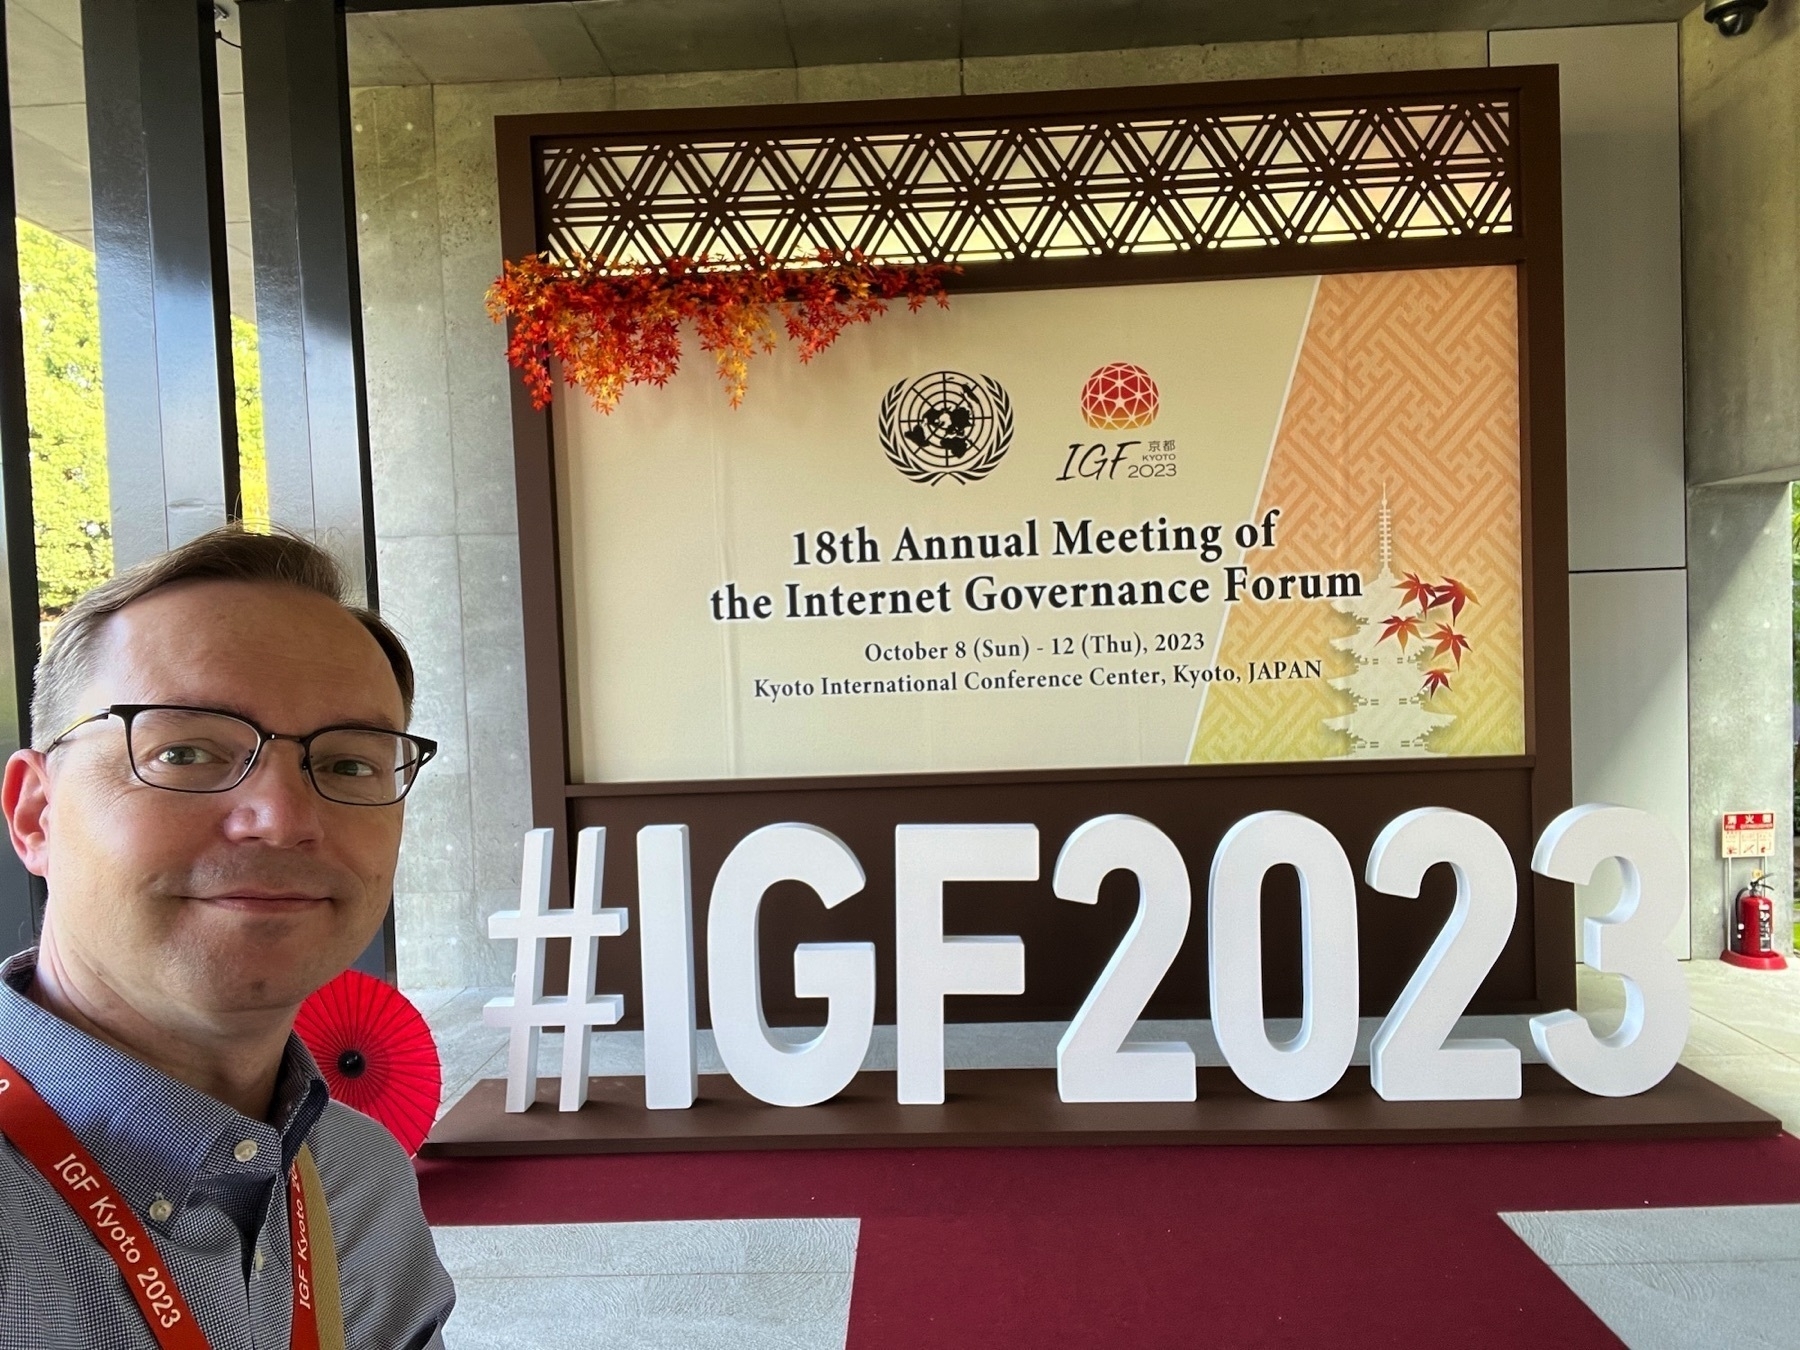 Chad takes a selfie at the entrance sign for the conference in front of a meter-tall novely #IGF2023 hashtag